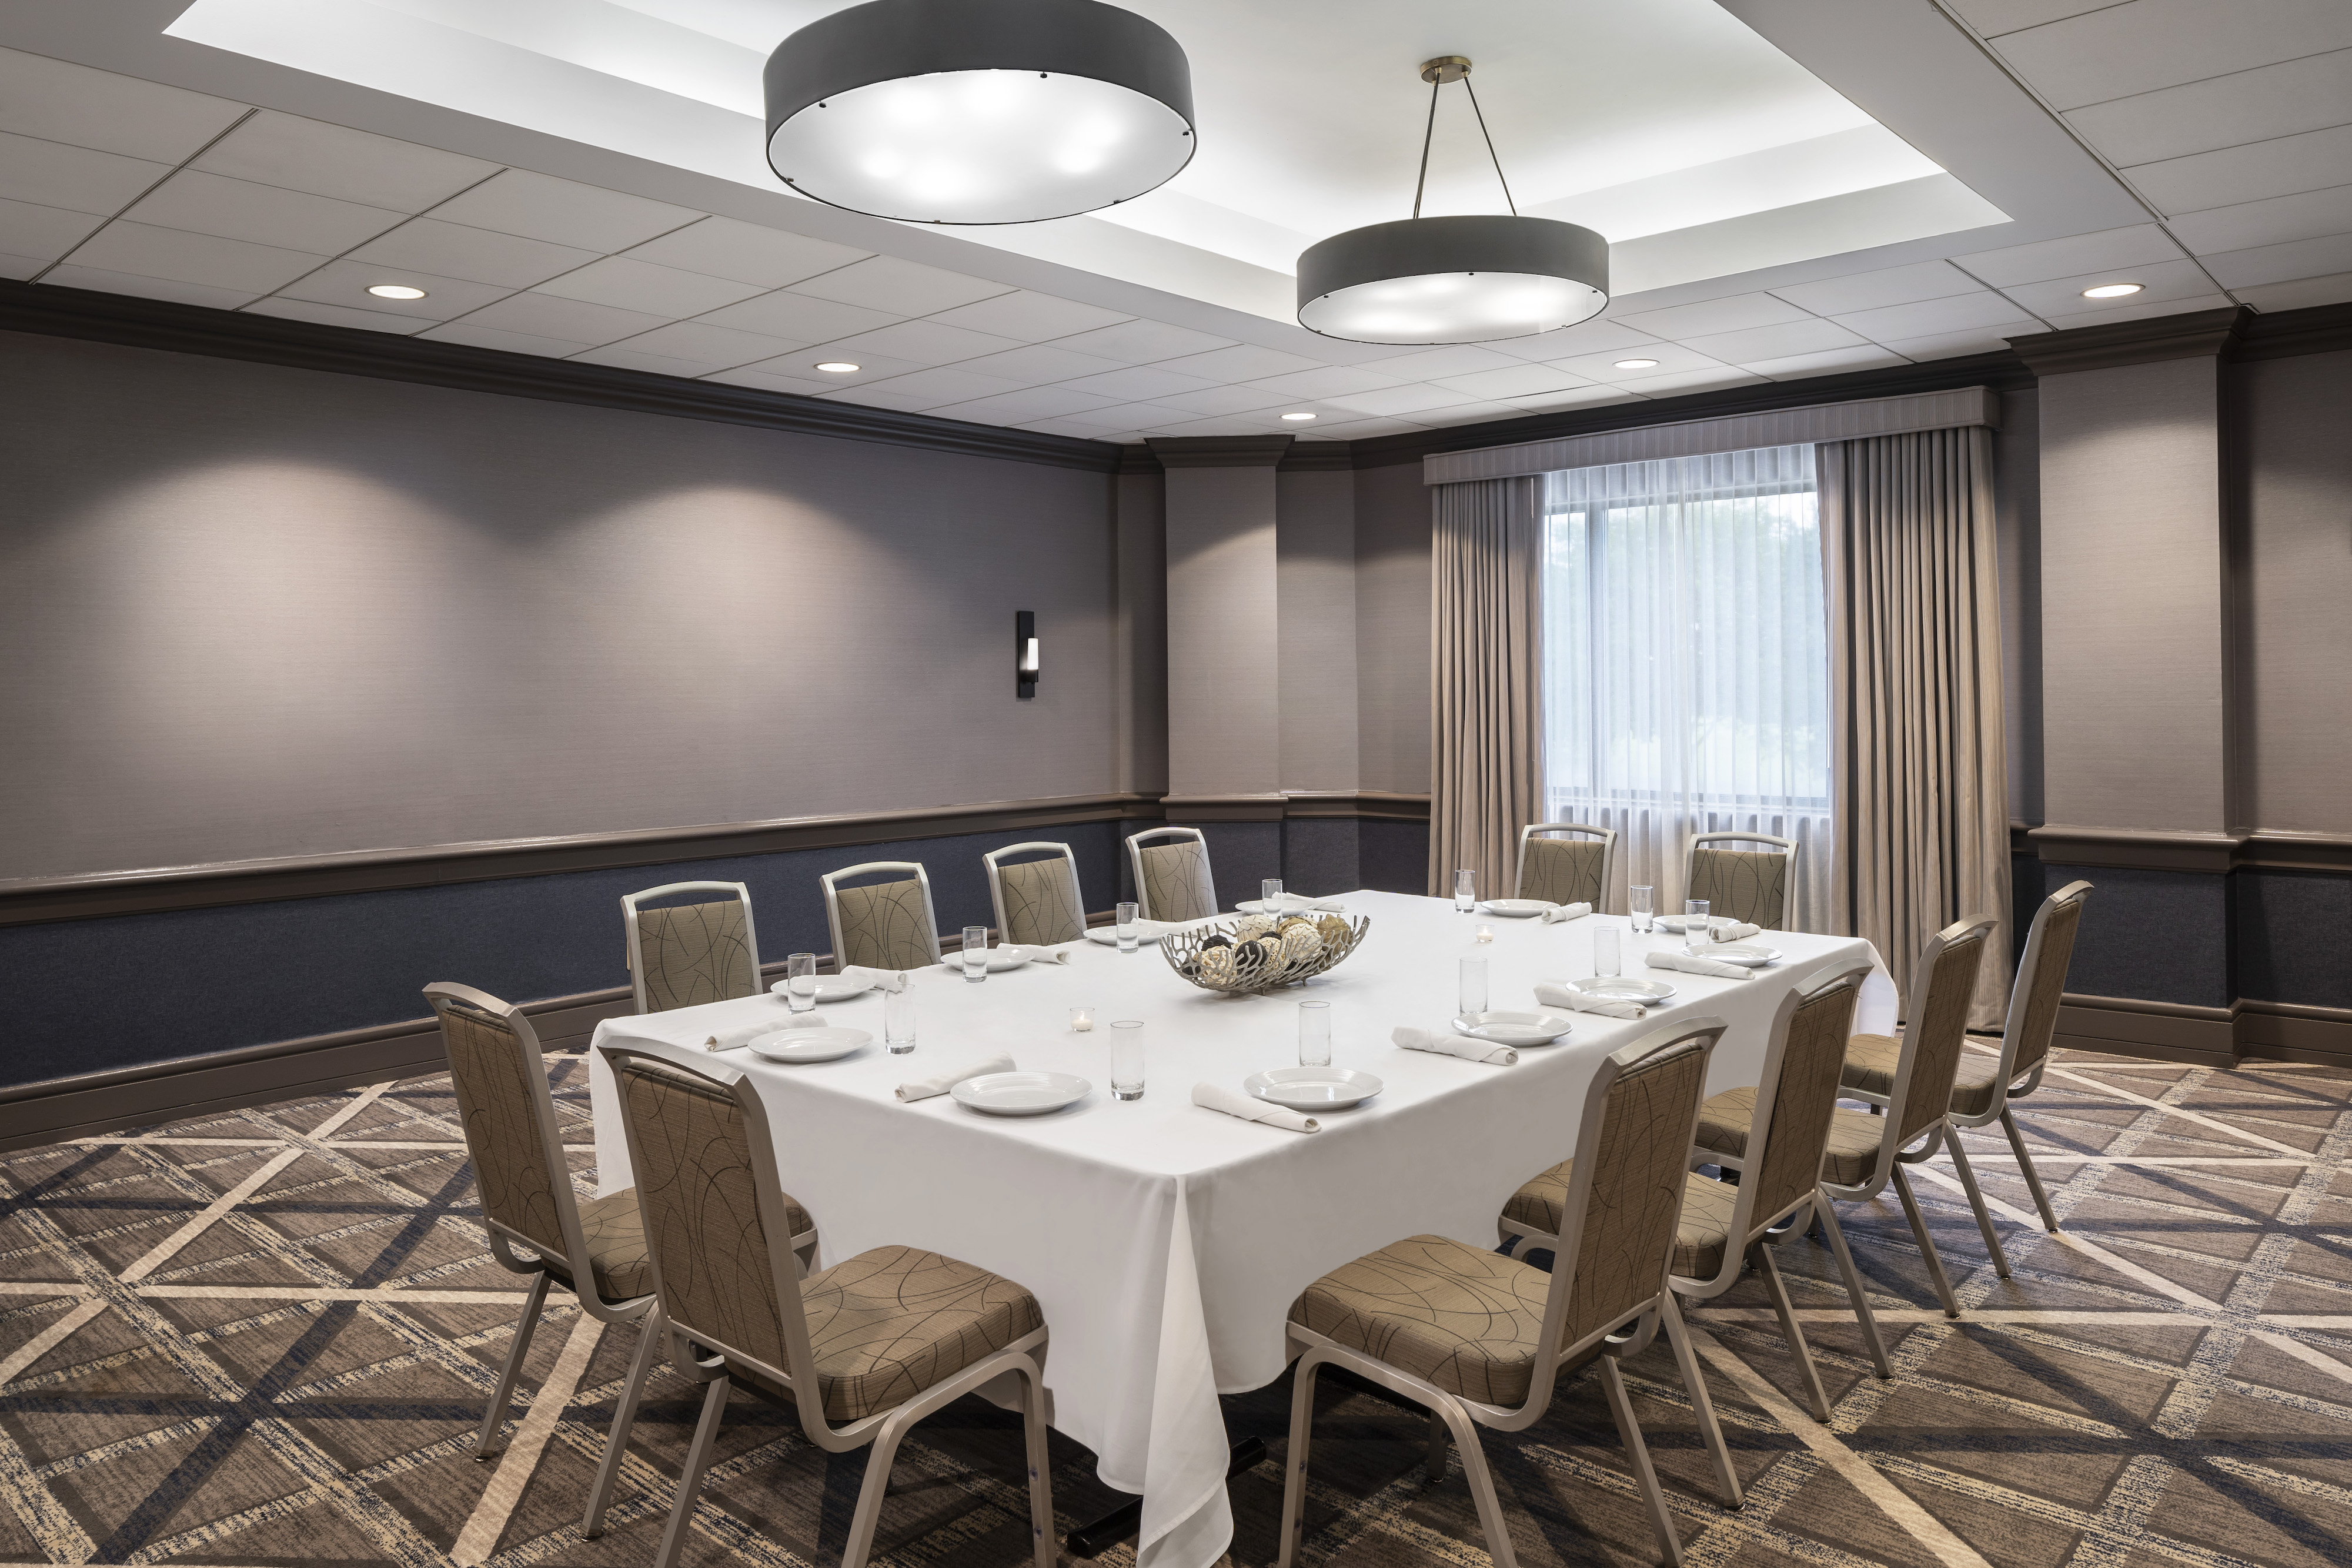 The Hilton Chicago/Oak Brook Hills Resort's Heron Meeting Room is one of many spaces perfect to hold a business event.